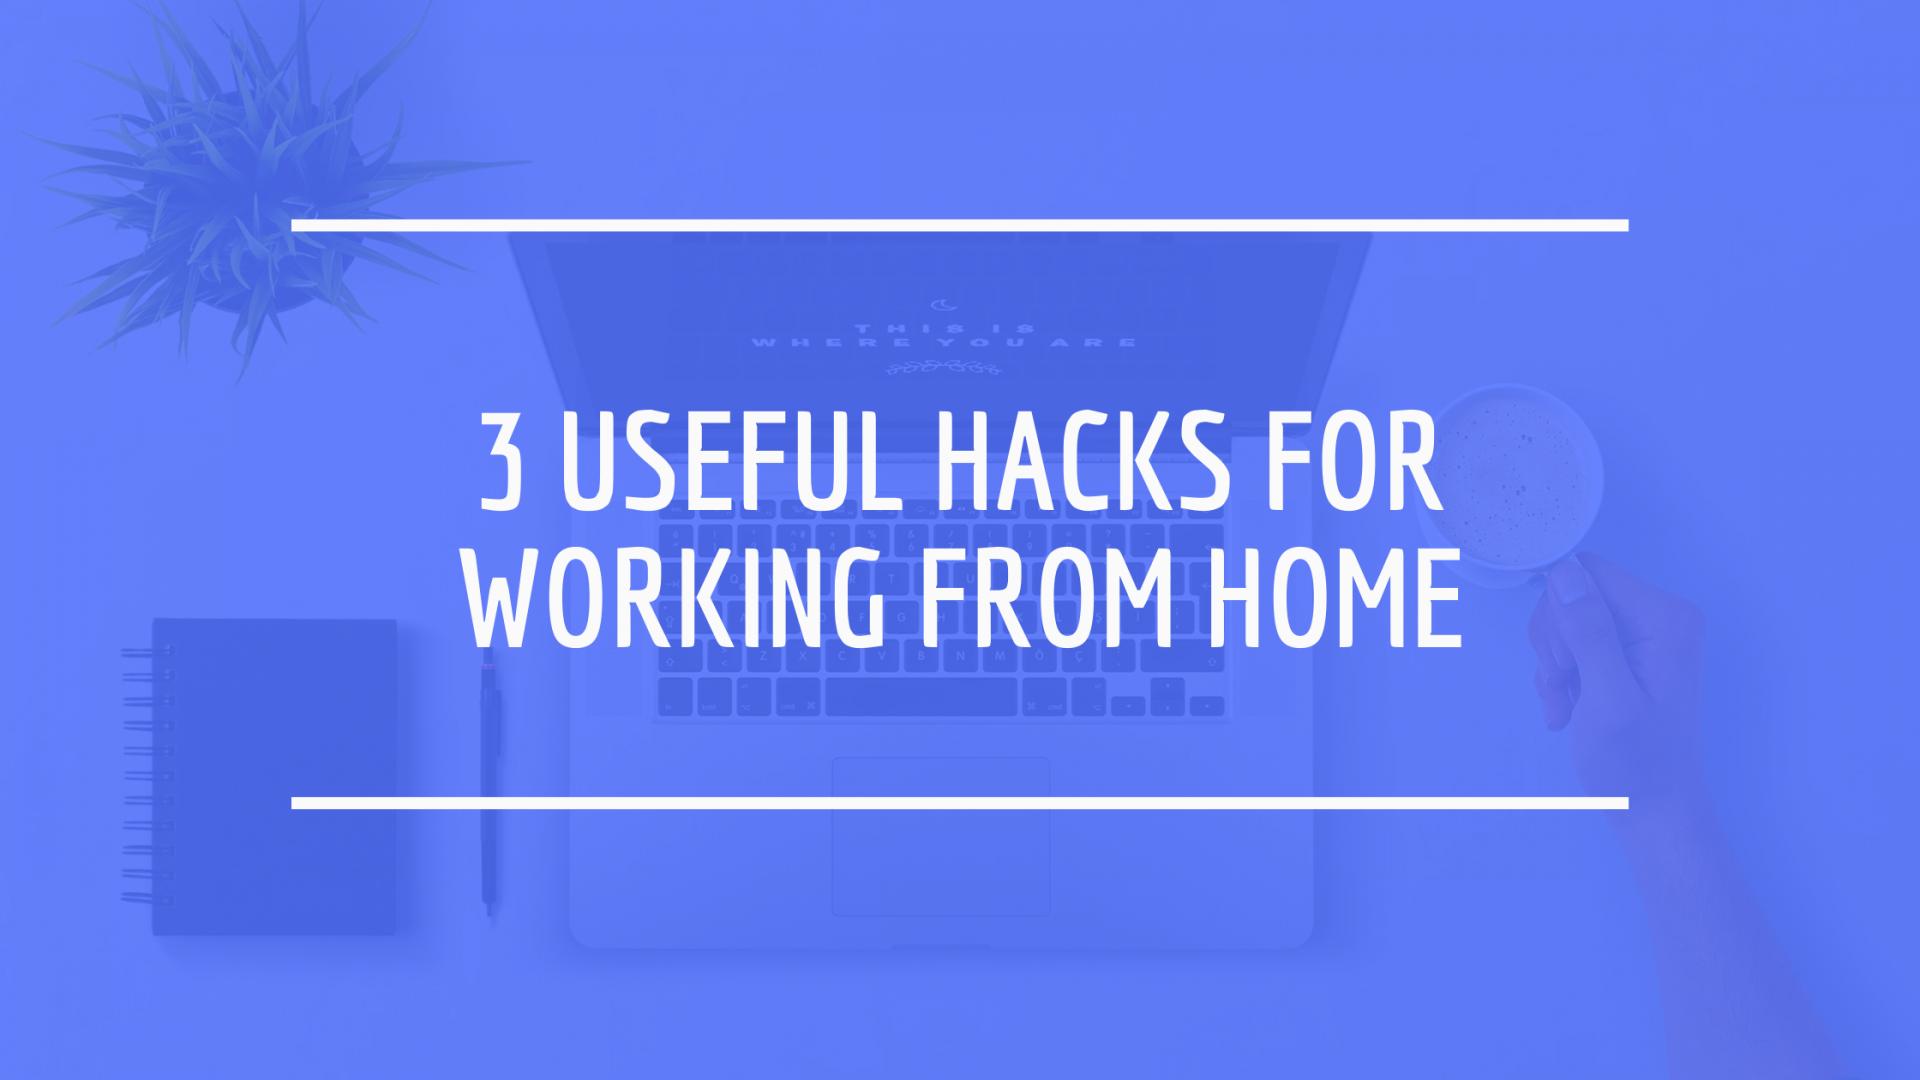 3 Useful Hacks for Working from Home